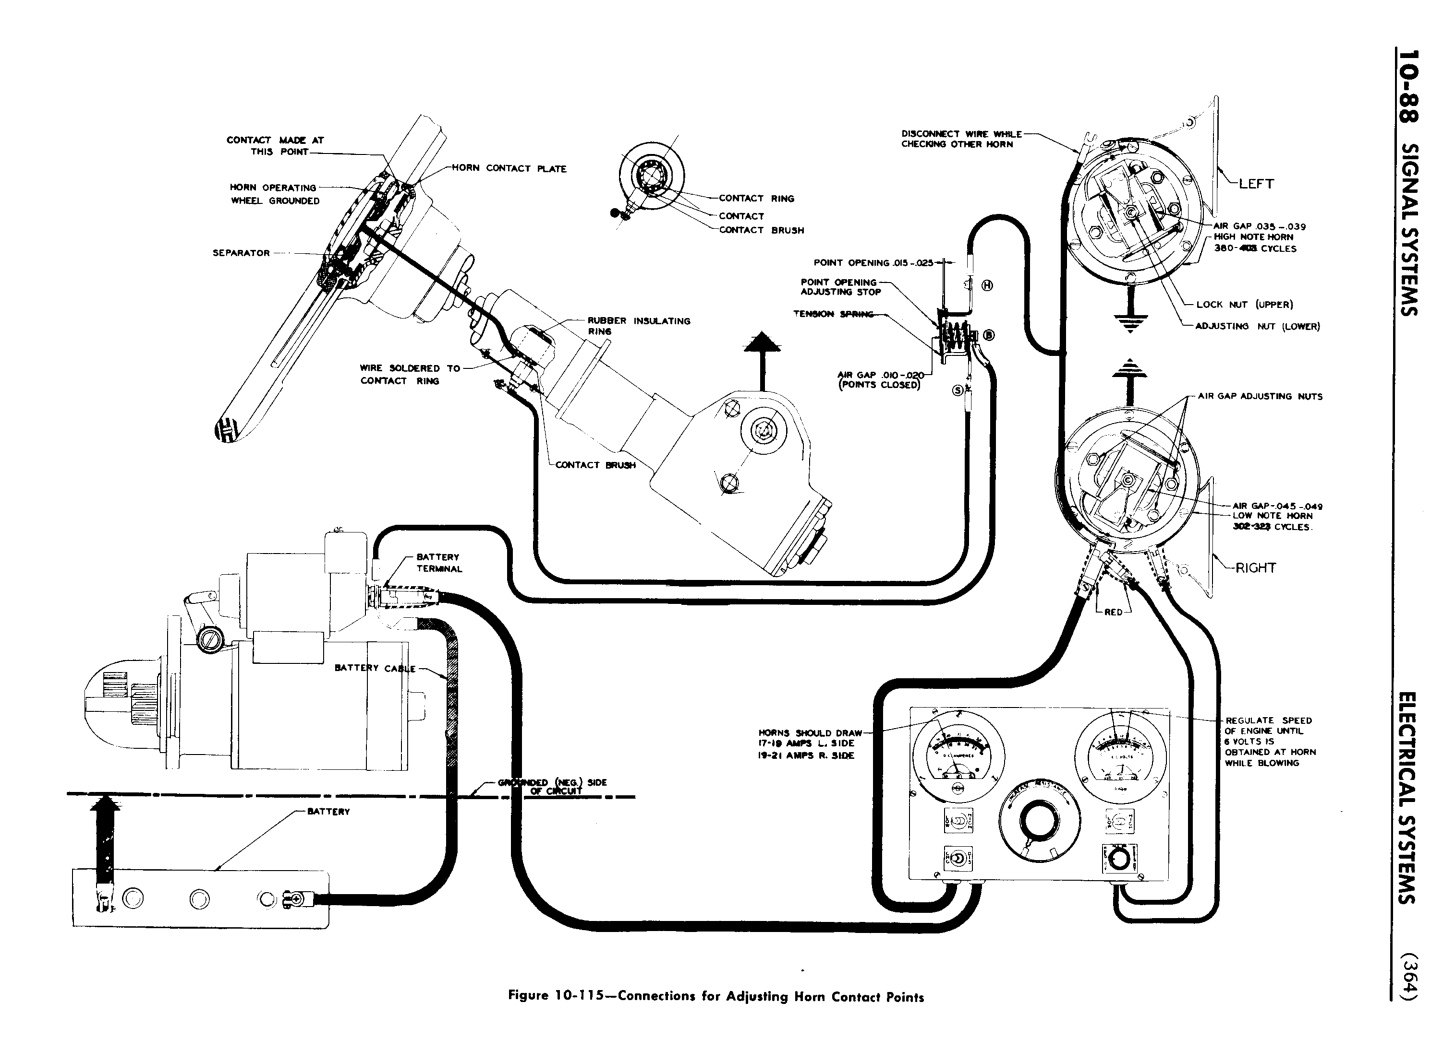 n_11 1948 Buick Shop Manual - Electrical Systems-088-088.jpg